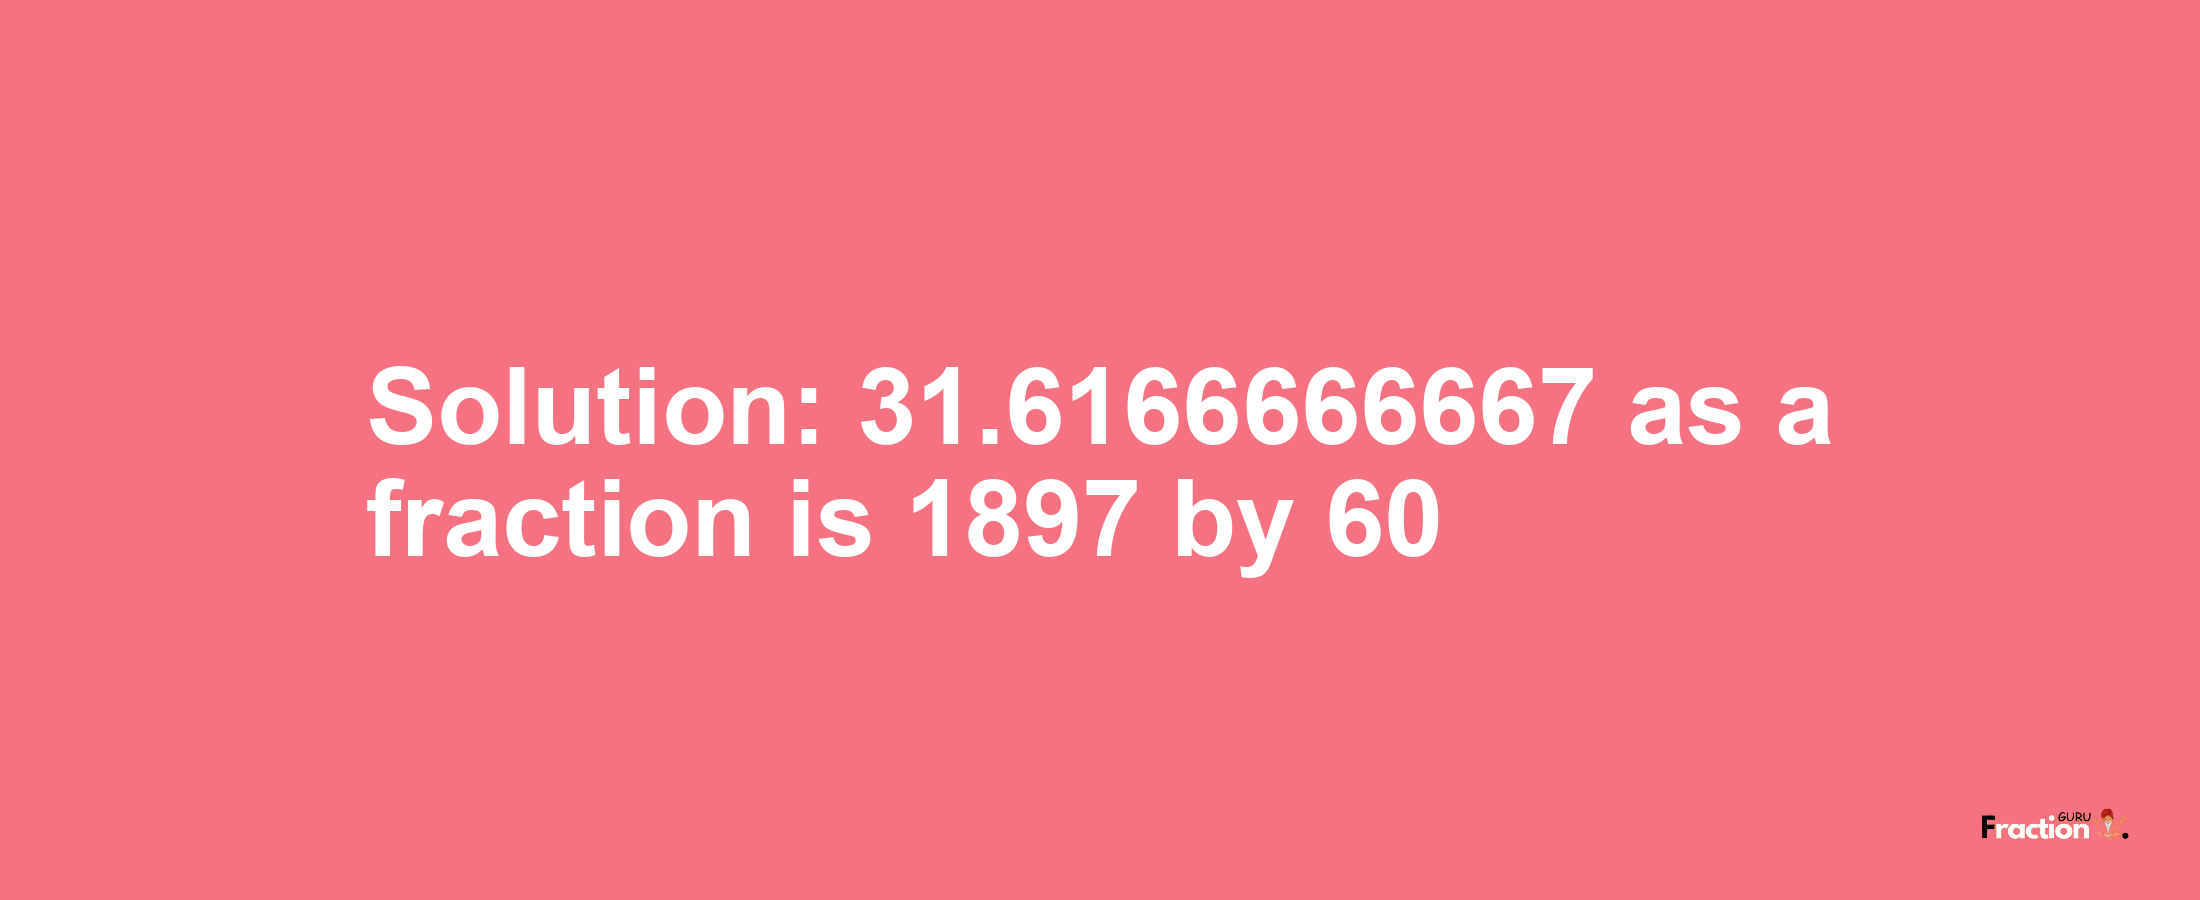 Solution:31.6166666667 as a fraction is 1897/60